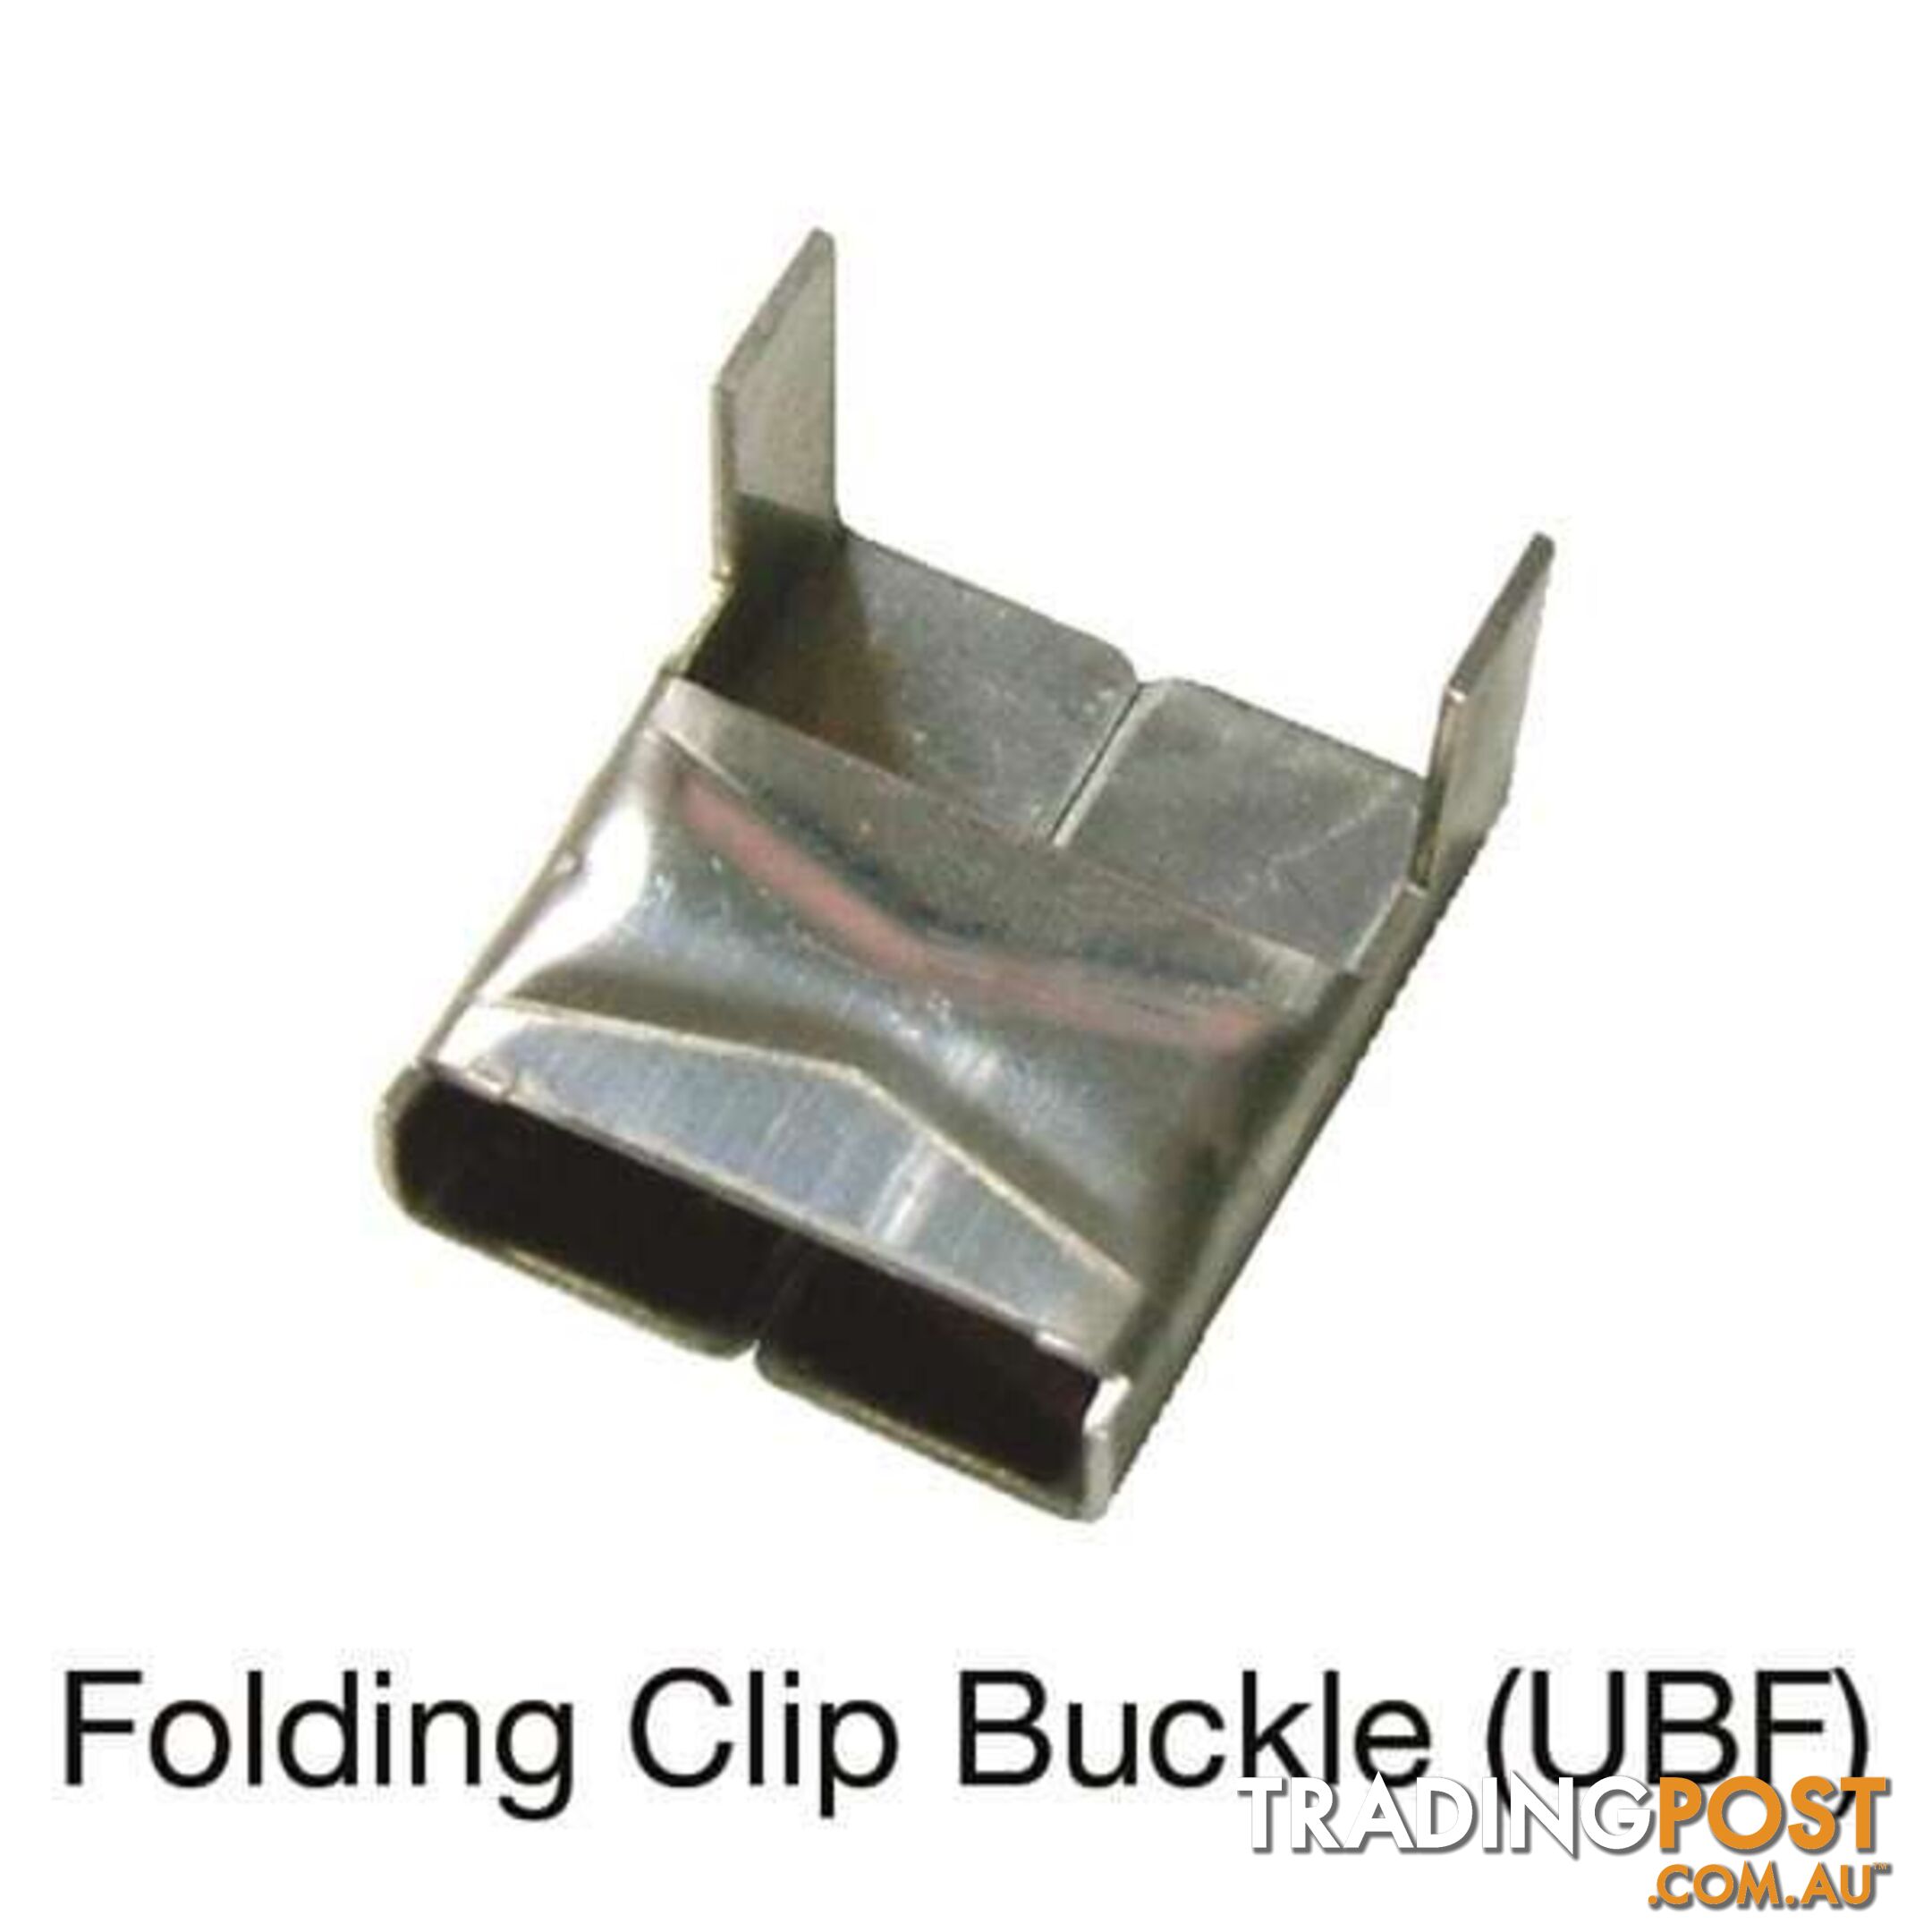 Tridon Folding Clip Buckle to suit 19.0mm (3/4 ") x 0.75mm 100 Pieces SKU - UBF012100